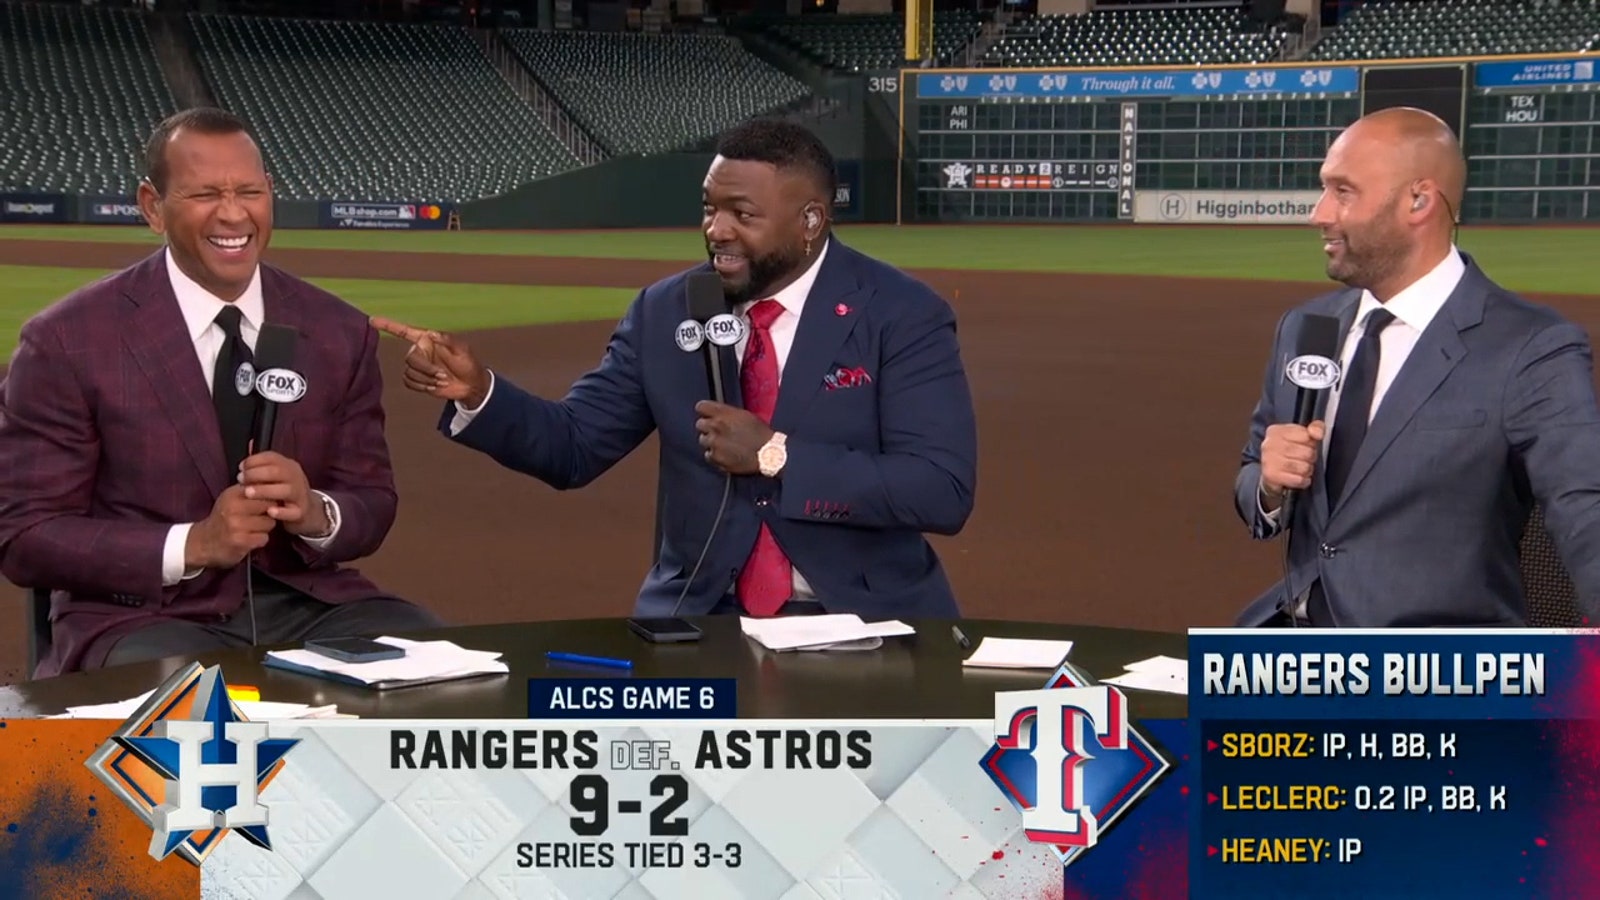 Rangers rout Astros in Game 6 — Jeter, Big Papi and A-Rod react